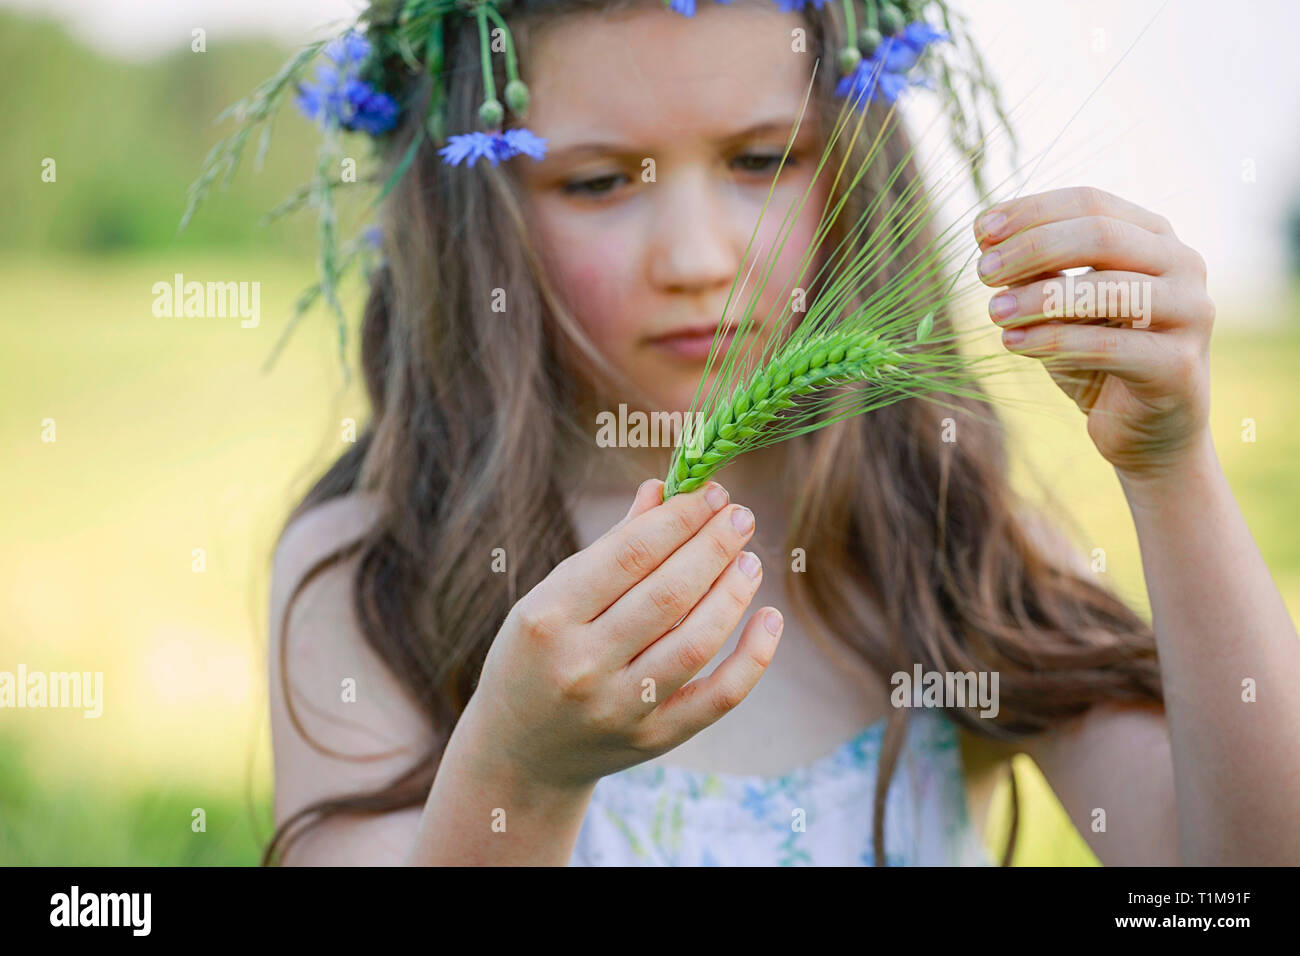 Curious girl holding green wheat stalk Stock Photo